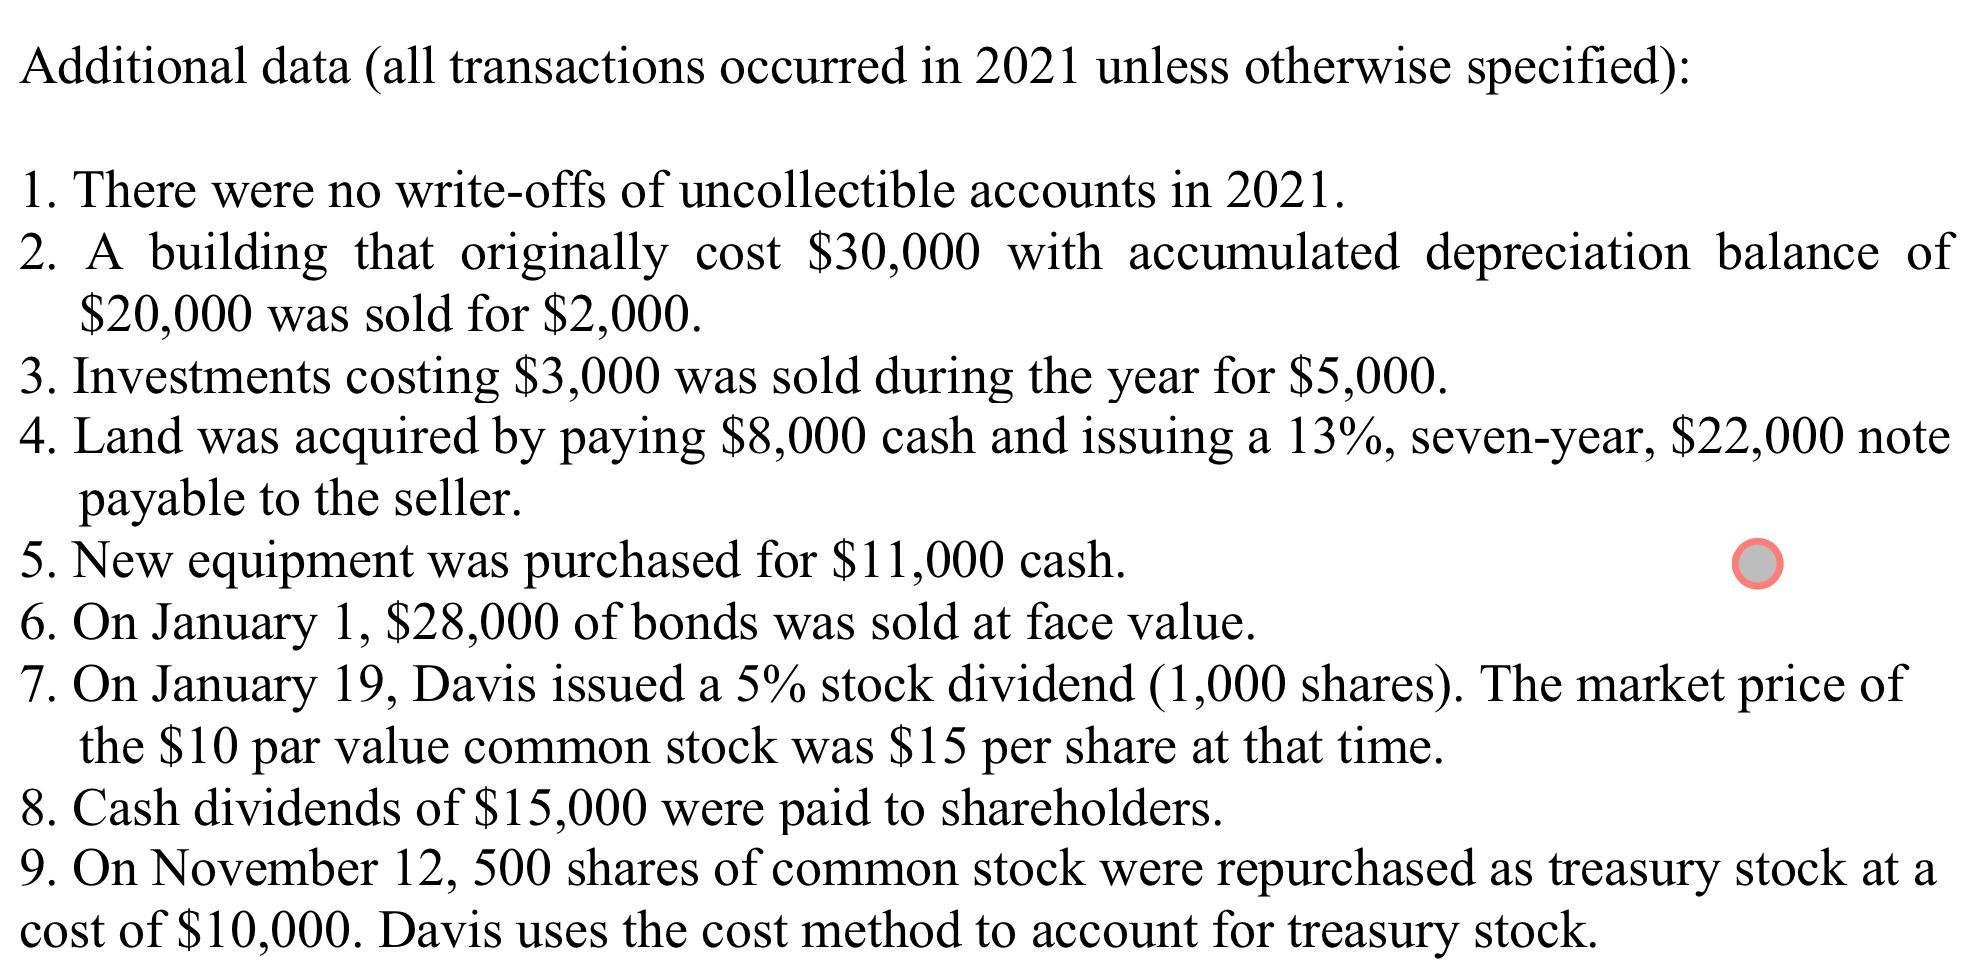 Additional data (all transactions occurred in 2021 unless otherwise specified): 1. There were no write-offs of uncollectible